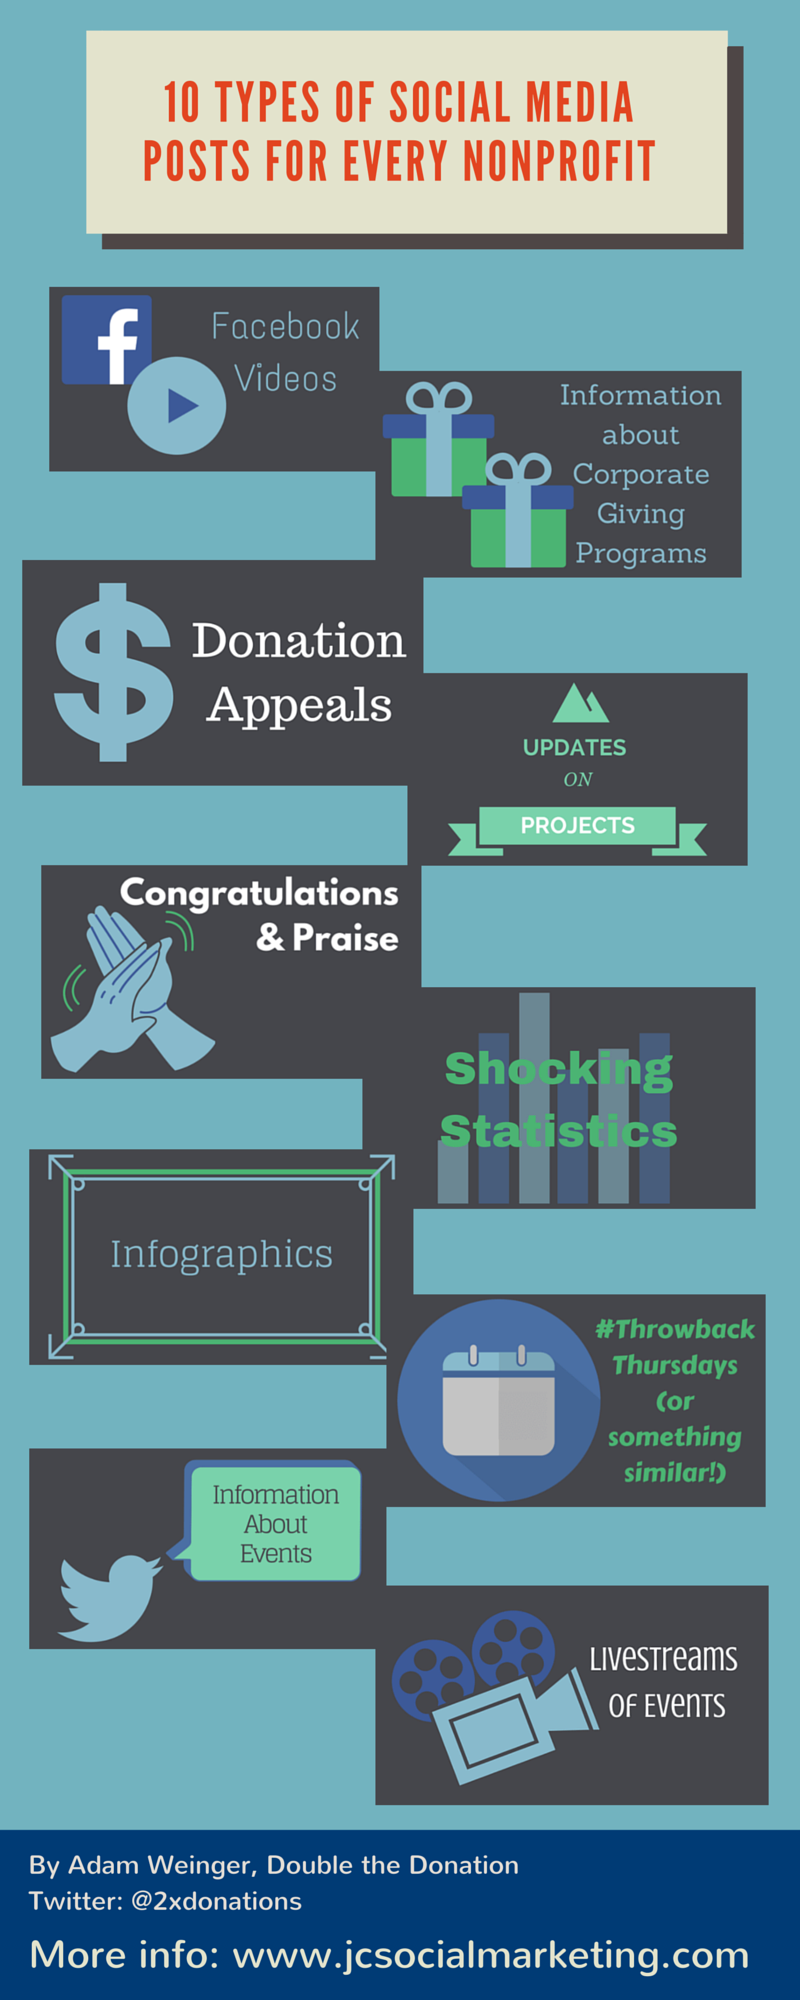 10 Types of social media posts for every nonprofit